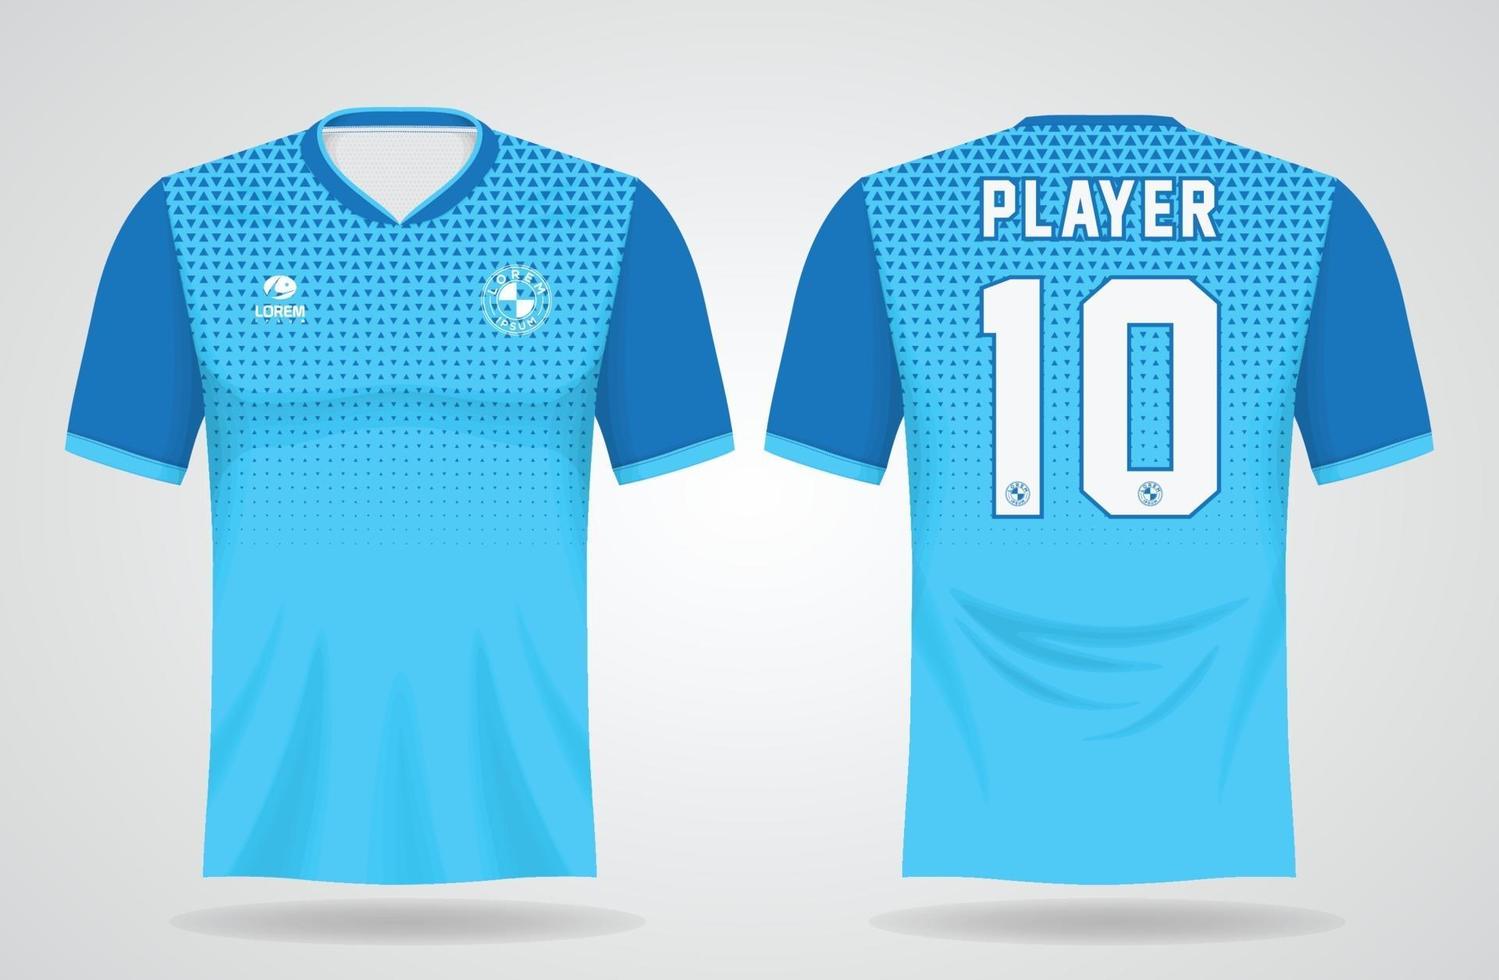 Blue sports jersey template for team uniforms and Soccer t shirt design vector